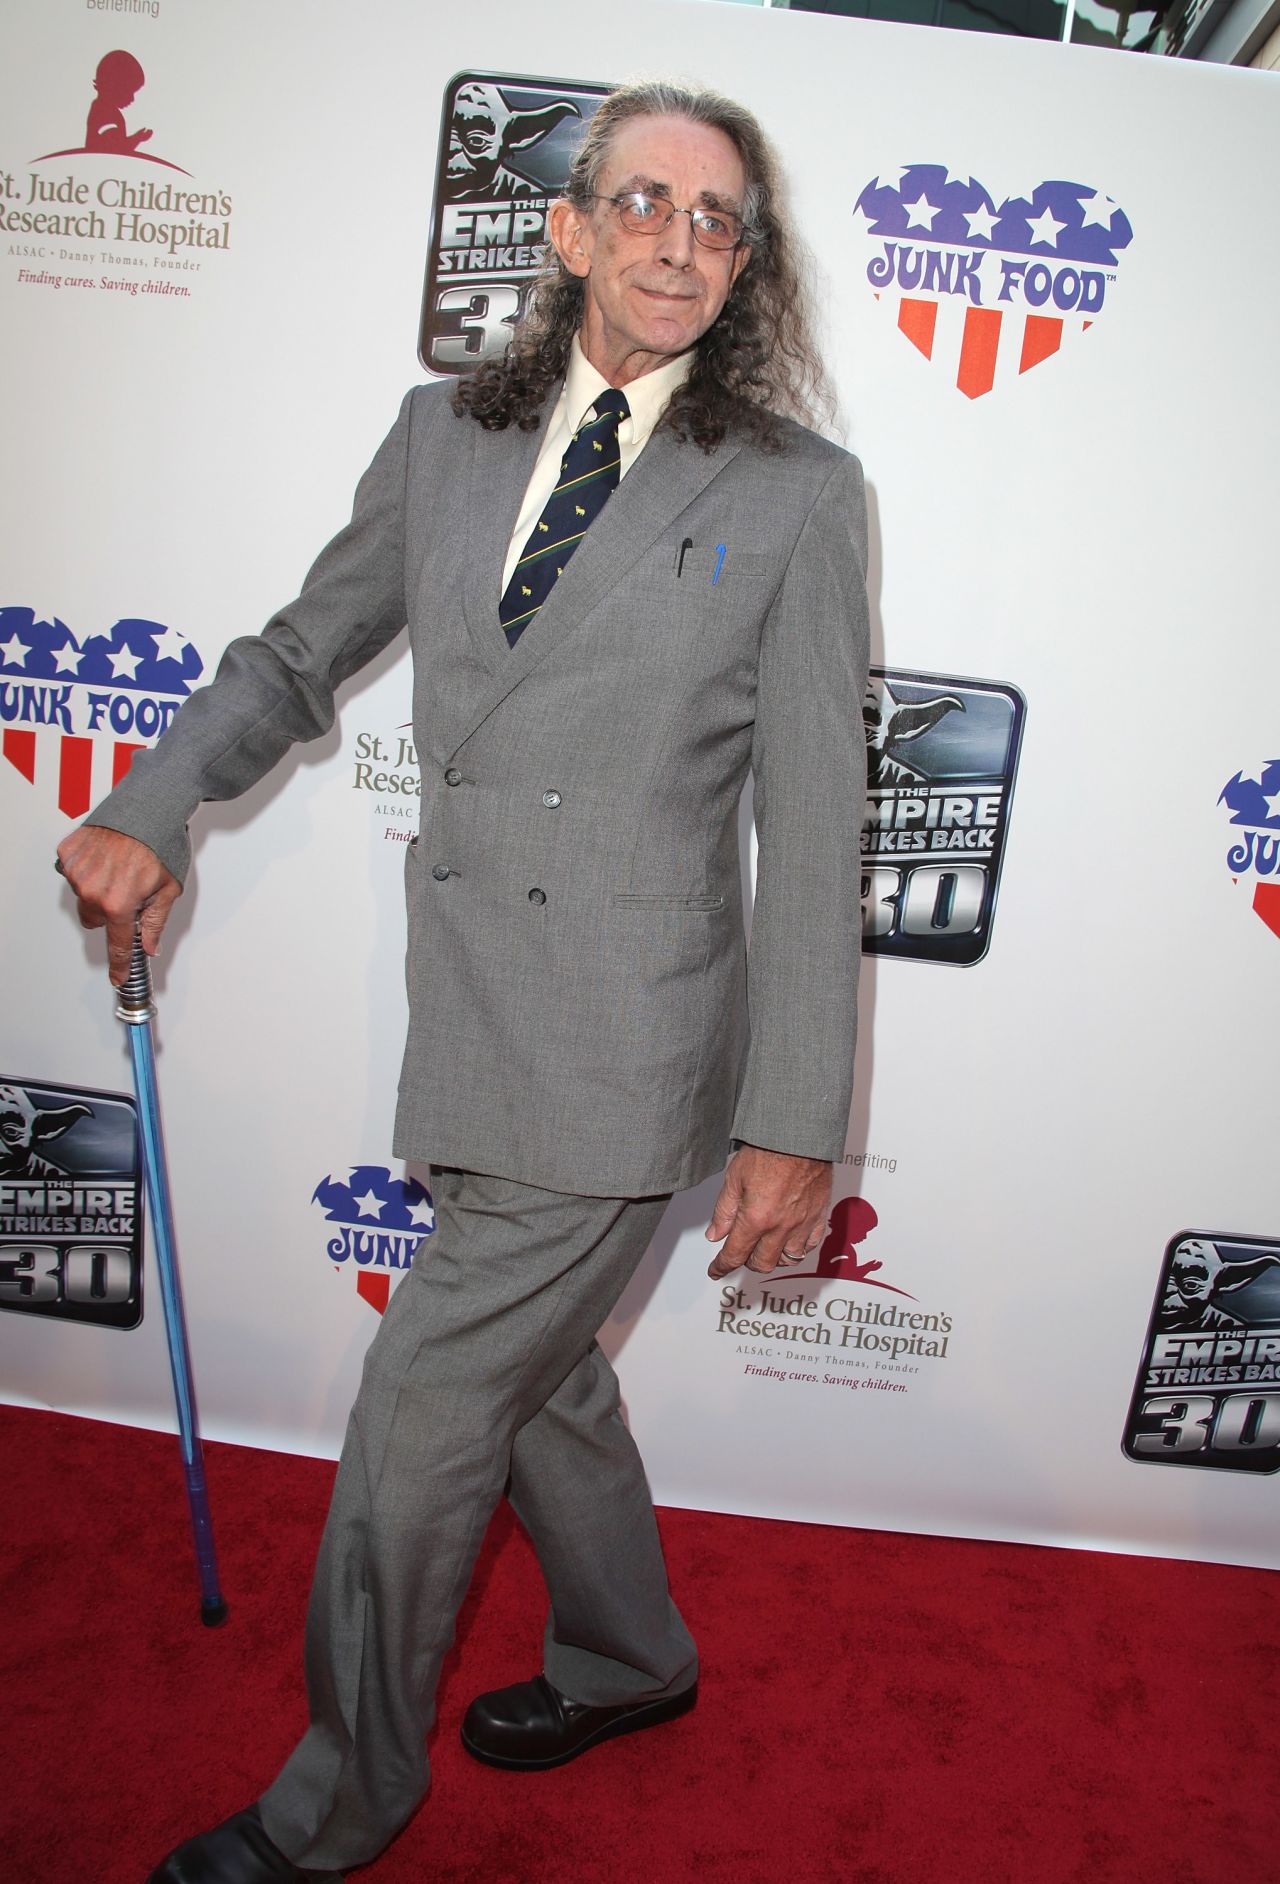 Peter Mayhew has continued voicing Chewbacca since he first played the Wookiee.